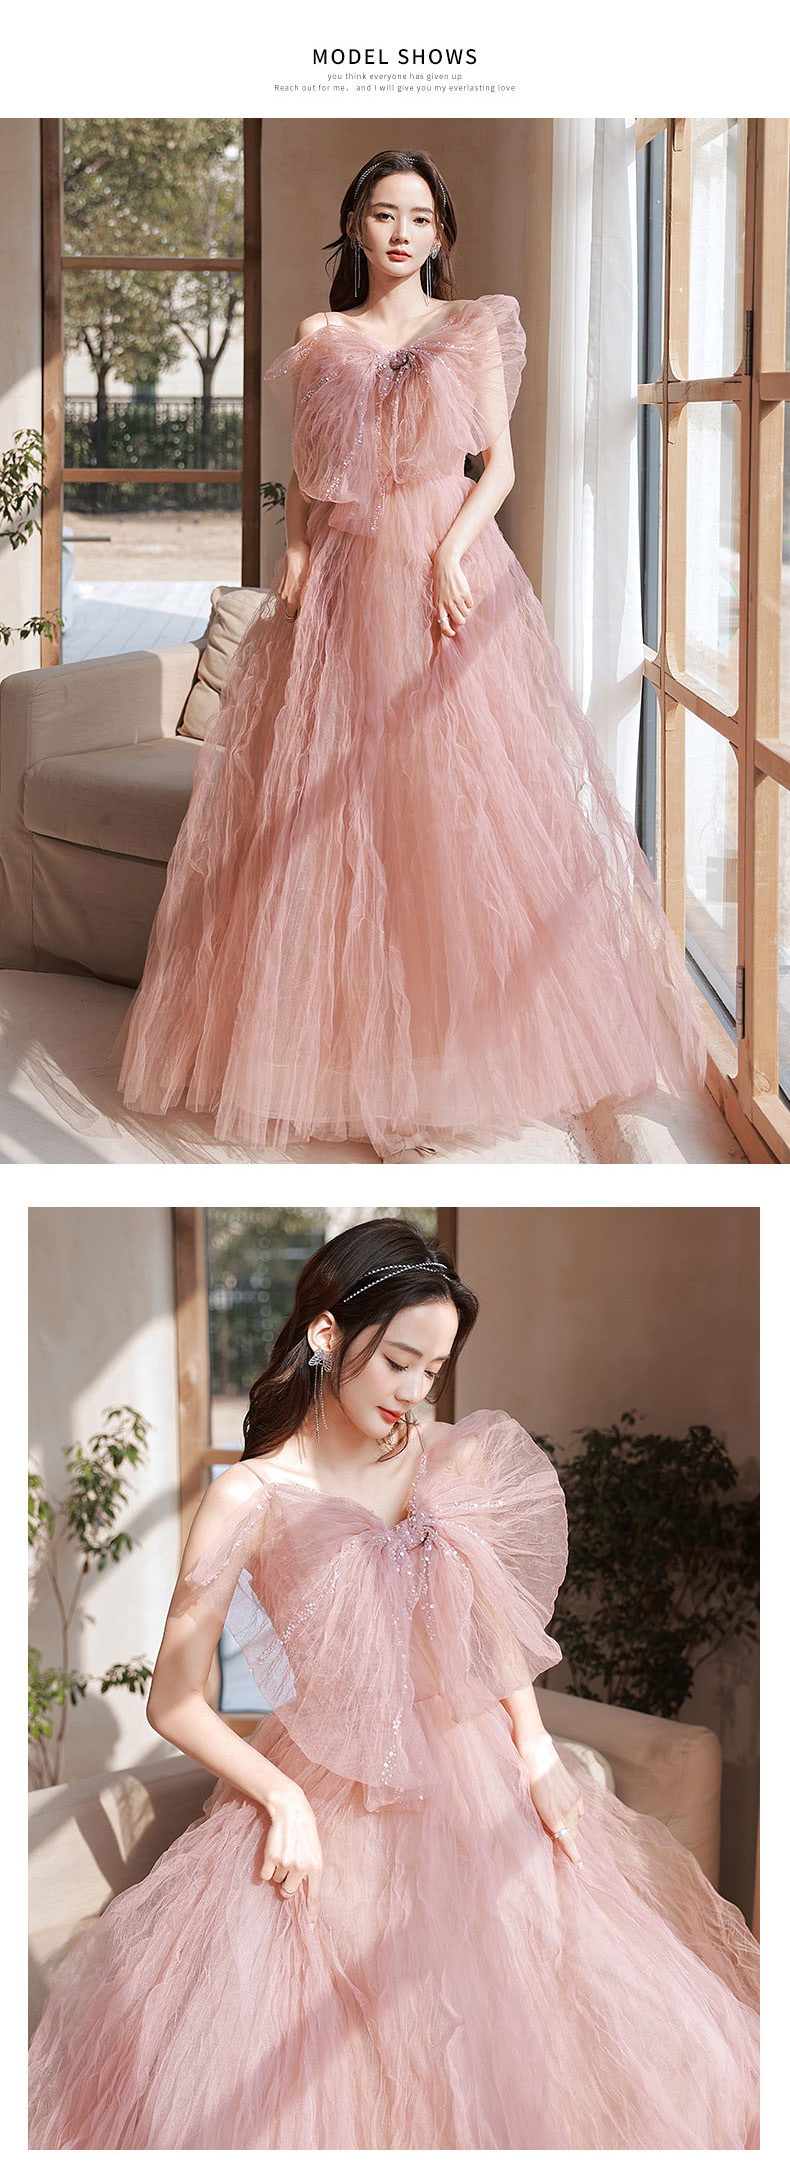 Sweet-Fairy-Pink-Tulle-Sleeveless-Prom-Evening-Party-Long-Dress09.jpg